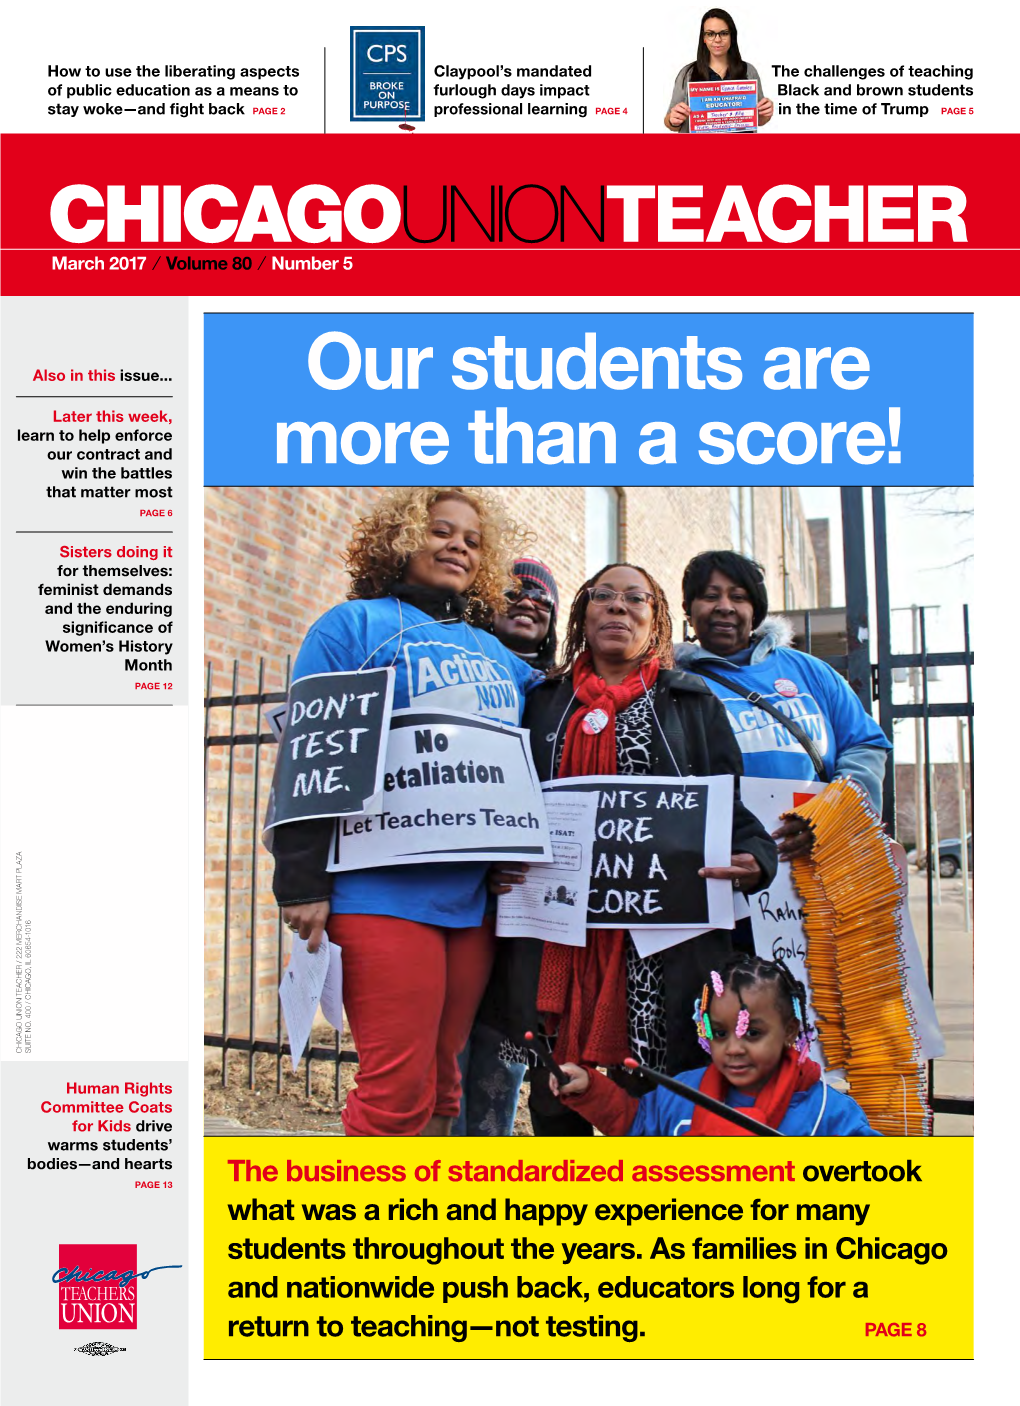 CHICAGOUNIONTEACHER Our Students Are More Than a Score!